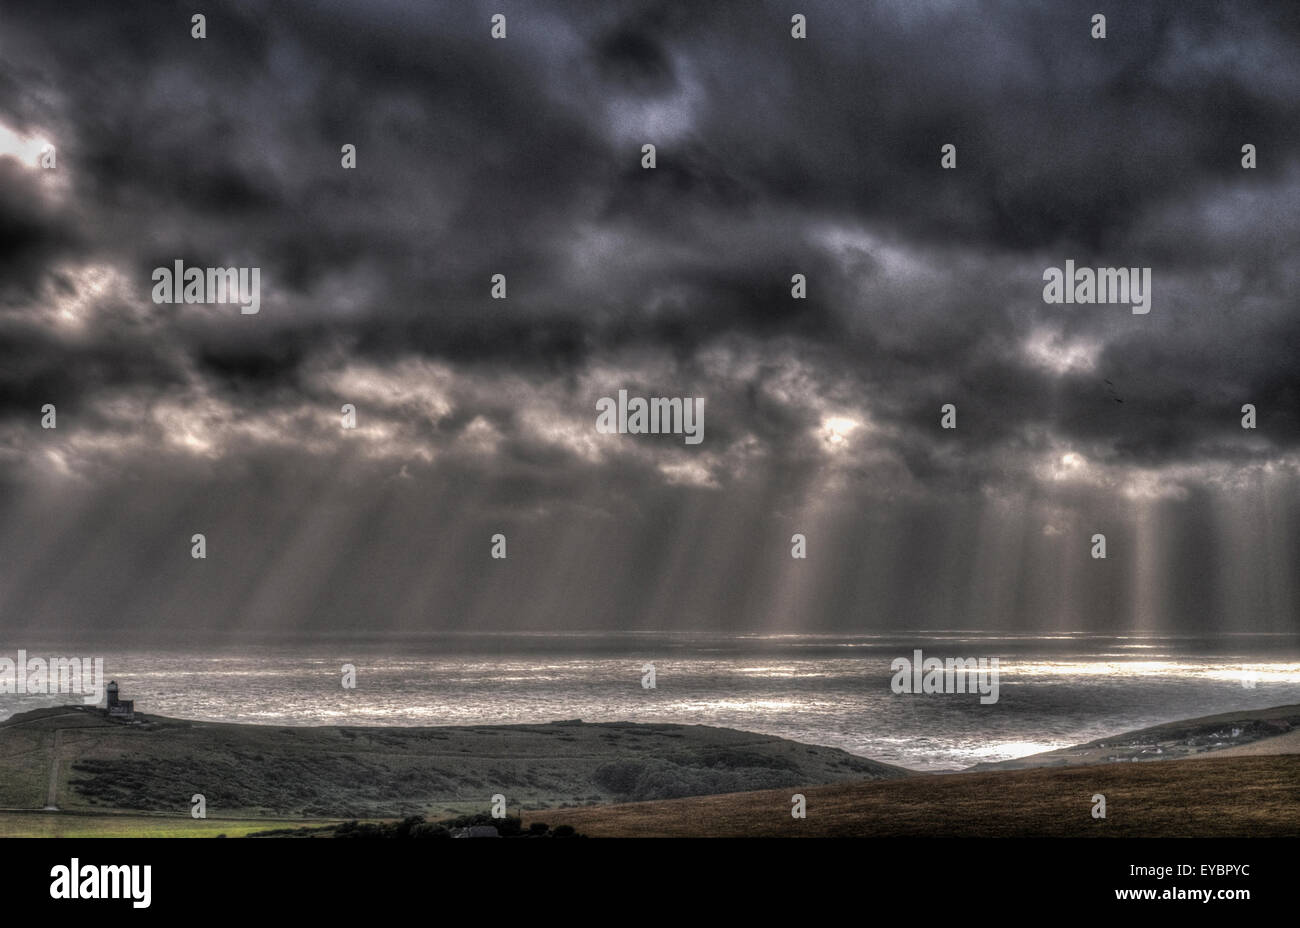 Eastbourne, East Sussex, UK. 26th July, 2015. Suns rays break through the cloud for a split second at the end of a cloudy wet windy day. Belle Tout lighthouse to left. Taken from Beachy Head. HDR Image. Stock Photo